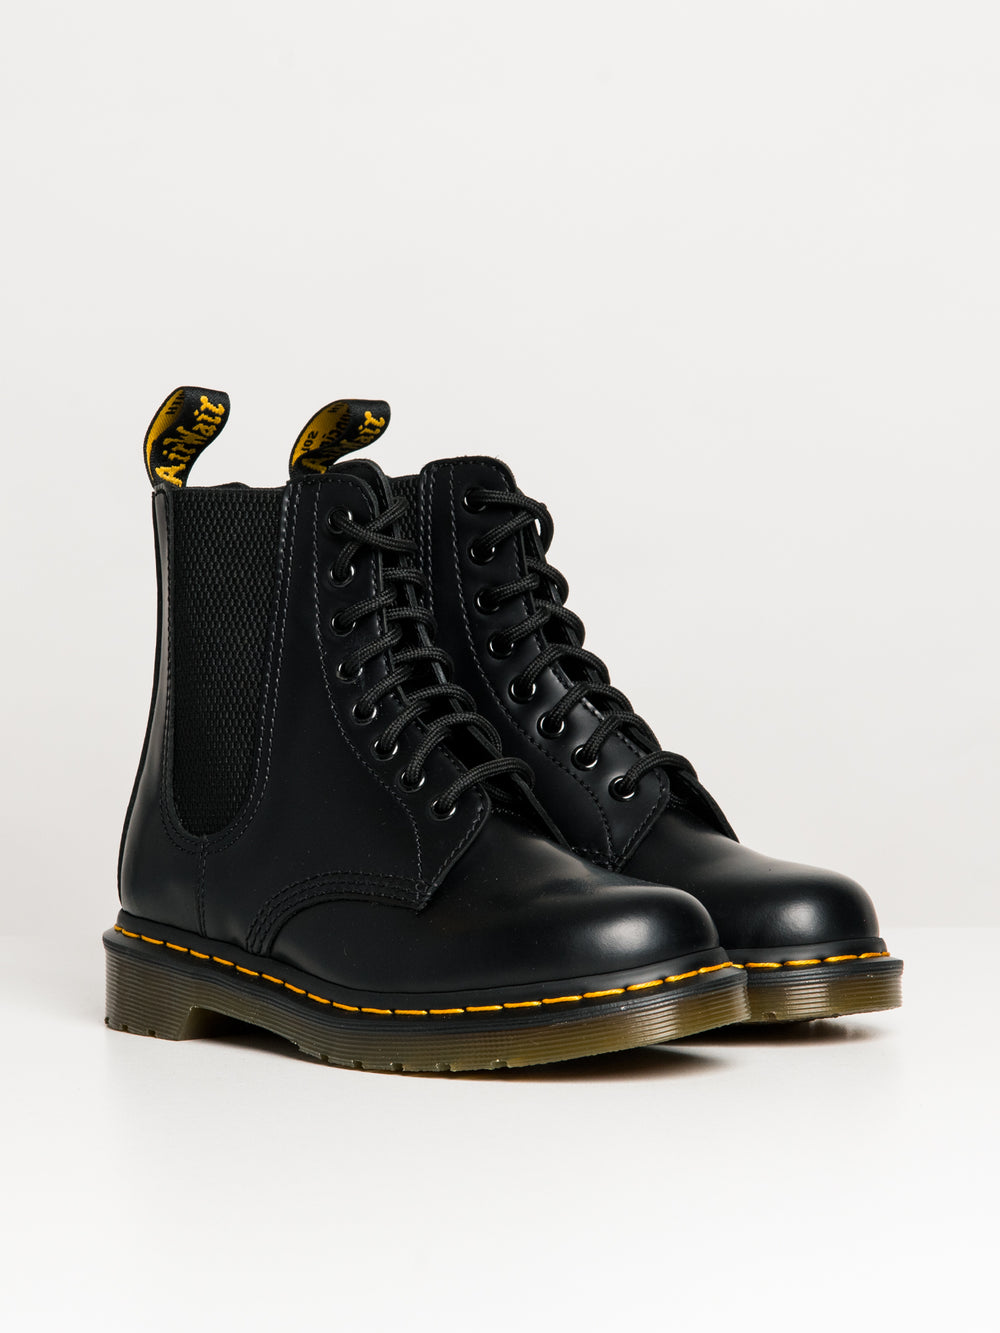 WOMENS DR MARTENS 1460 HARPER SMOOTH BOOT - CLEARANCE